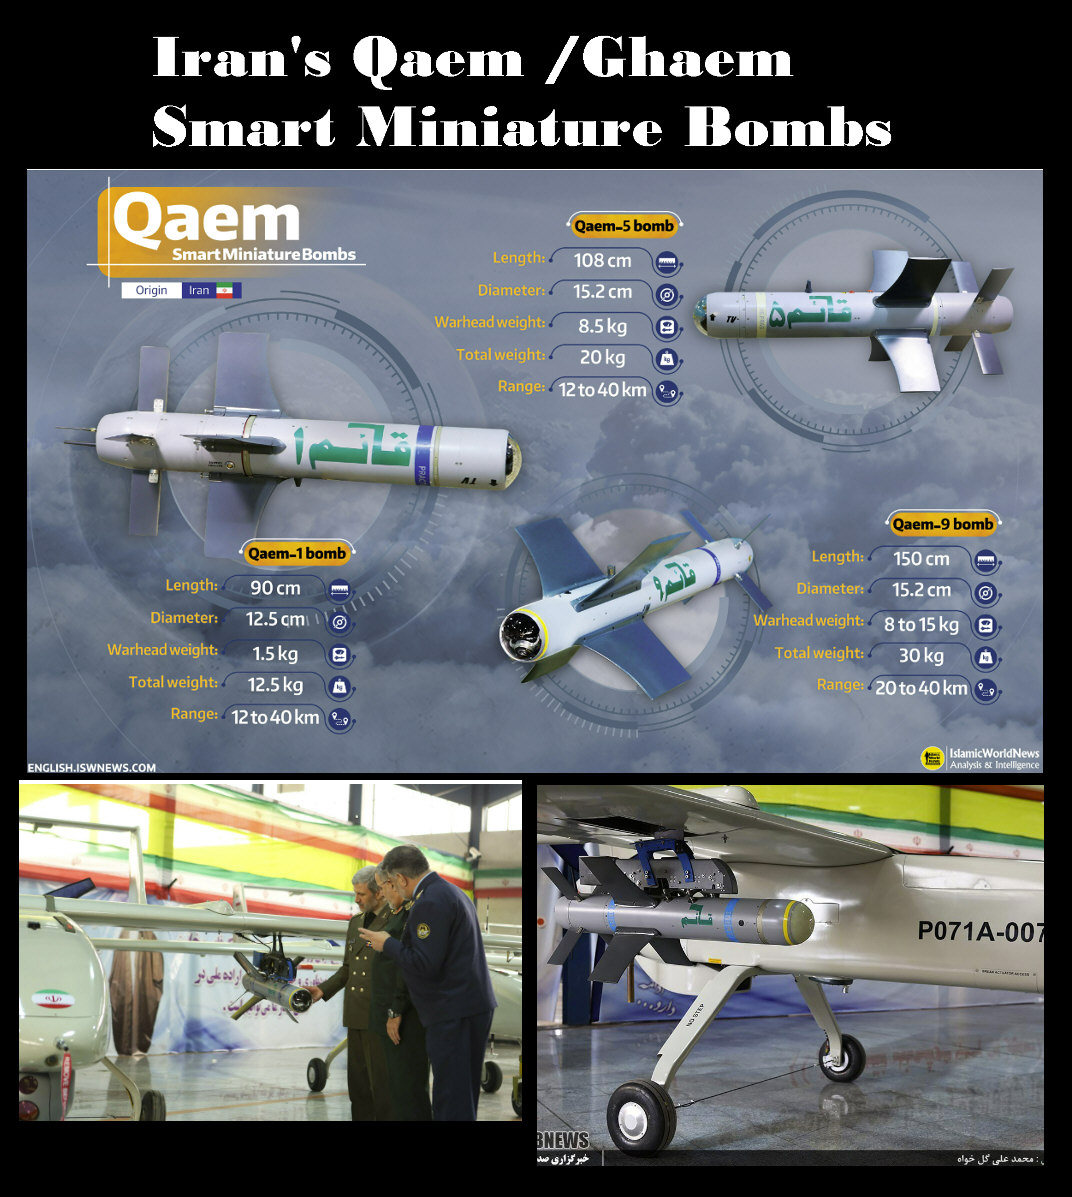 You are currently viewing Iran’s Qaem /Ghaem Smart Miniature Bombs